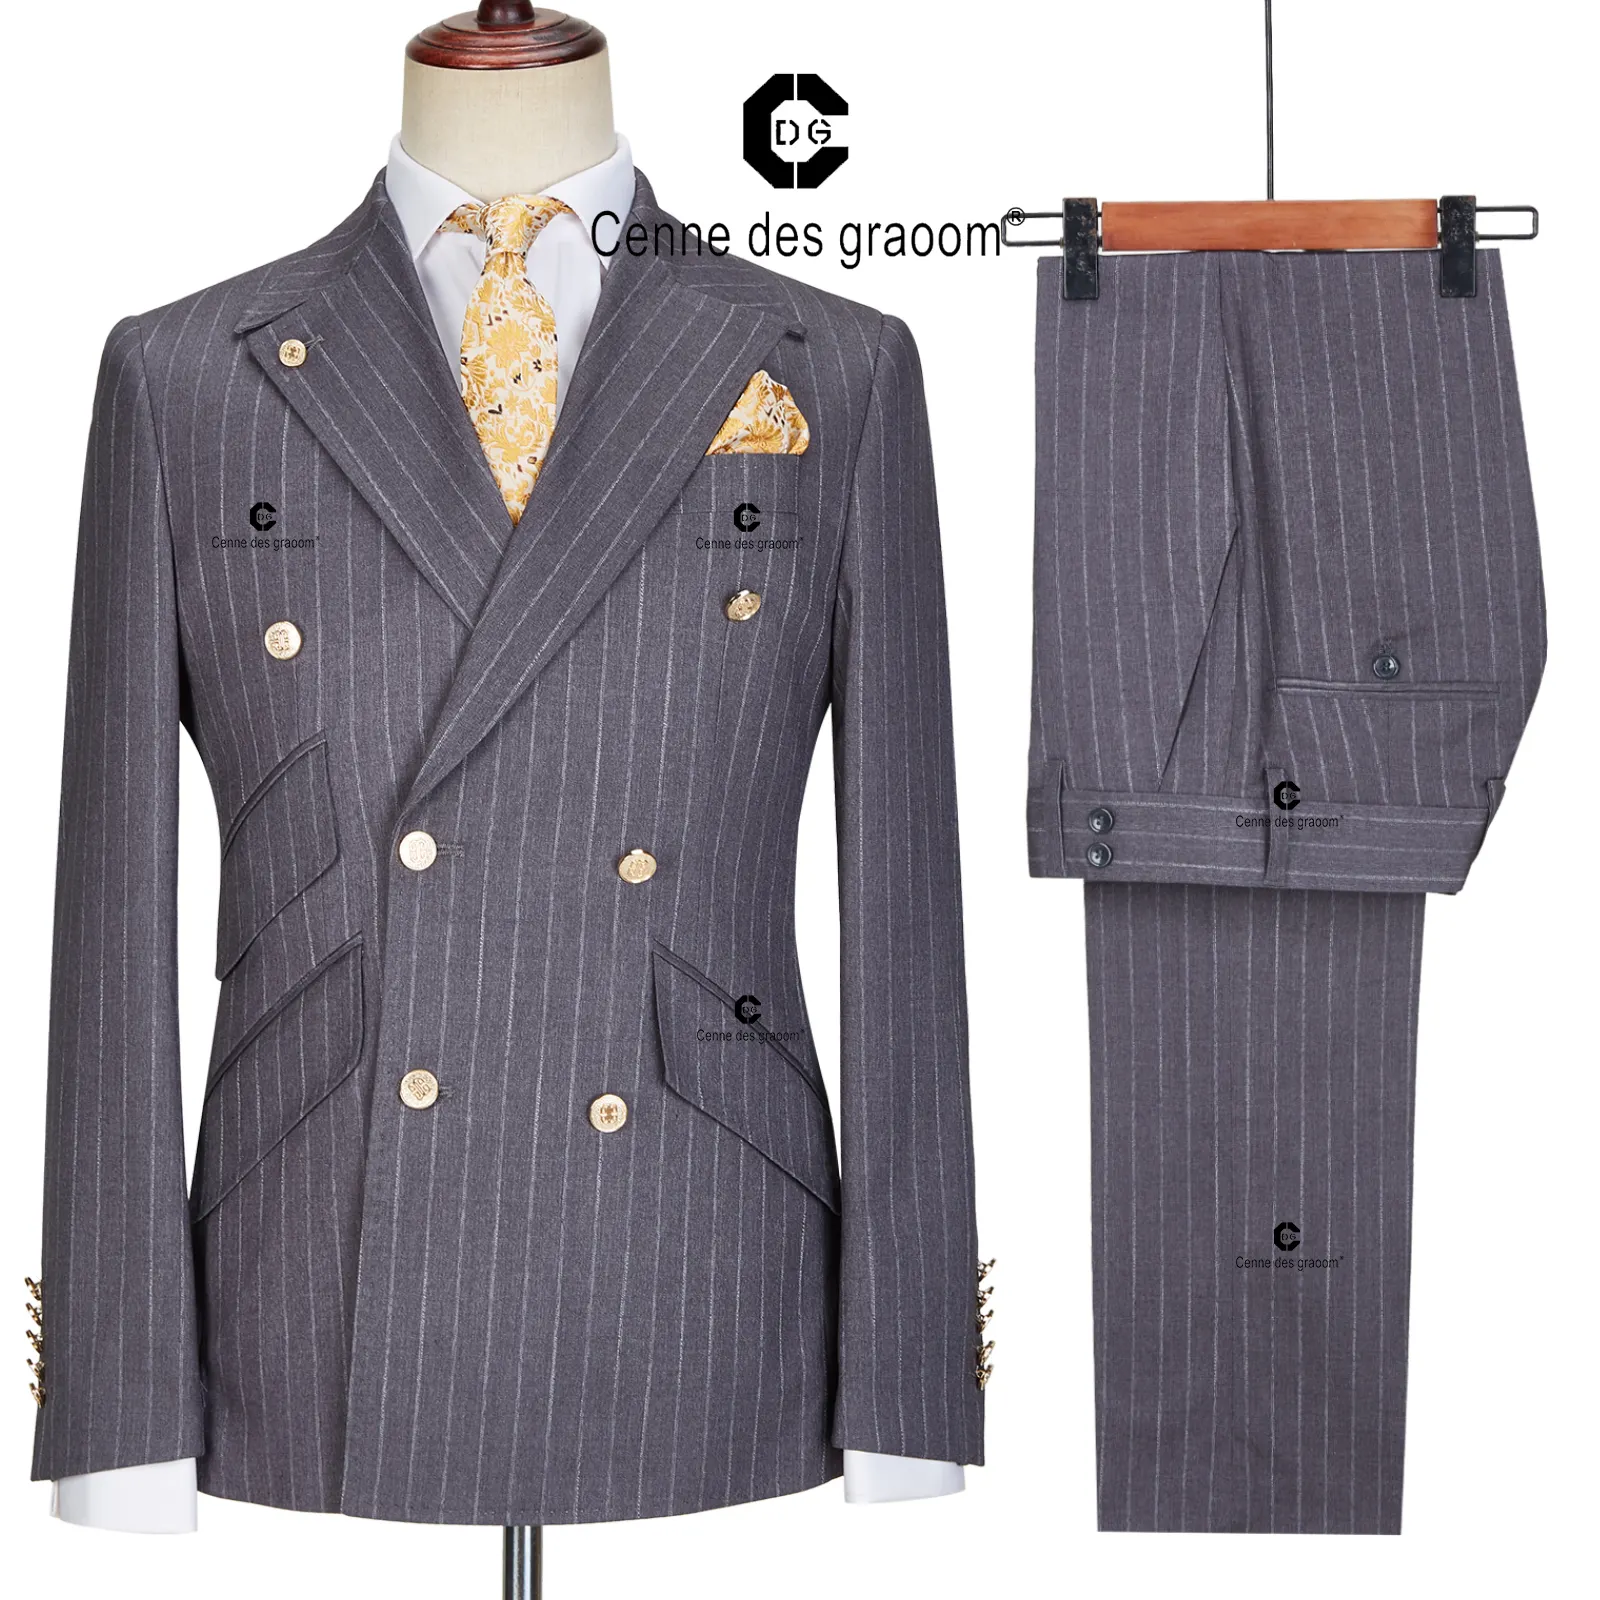 Genne des graoomNew Men's Decoration Gold Double-Breasted Six-Button Striped Business Office Suit Gray